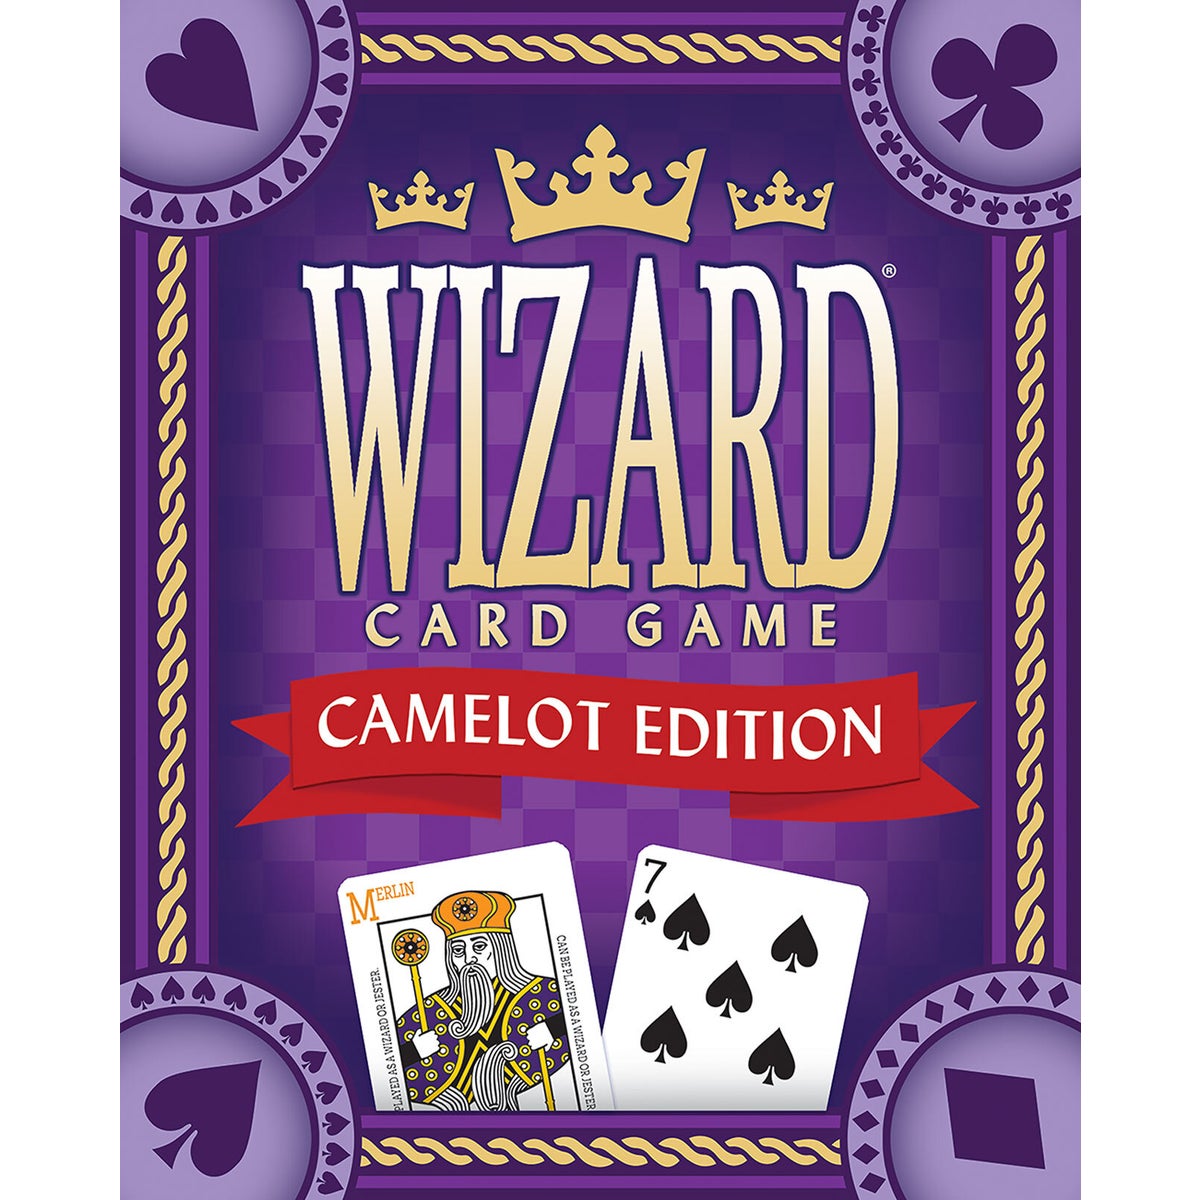 WIZARD CARD GAME CAMELOT EDITION (6) ENG